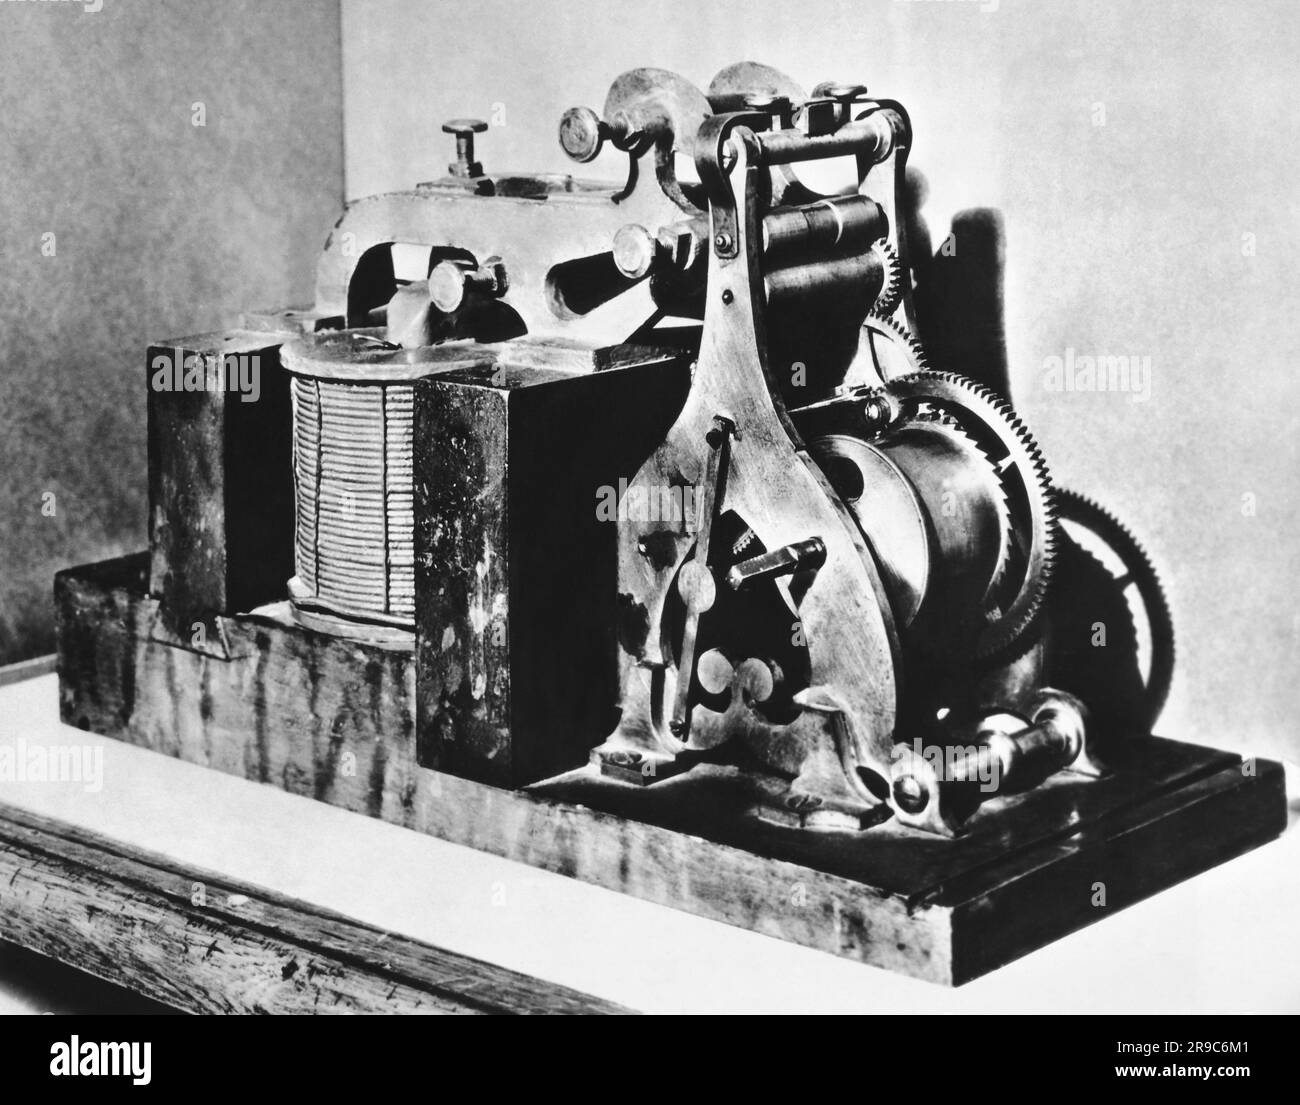 Washington, D.C.:   November 21, 1936 The original Morse telegraph receiver on which 'What Hath God Wrought?' was received on May 24, 1844 in Washington DC. Stock Photo